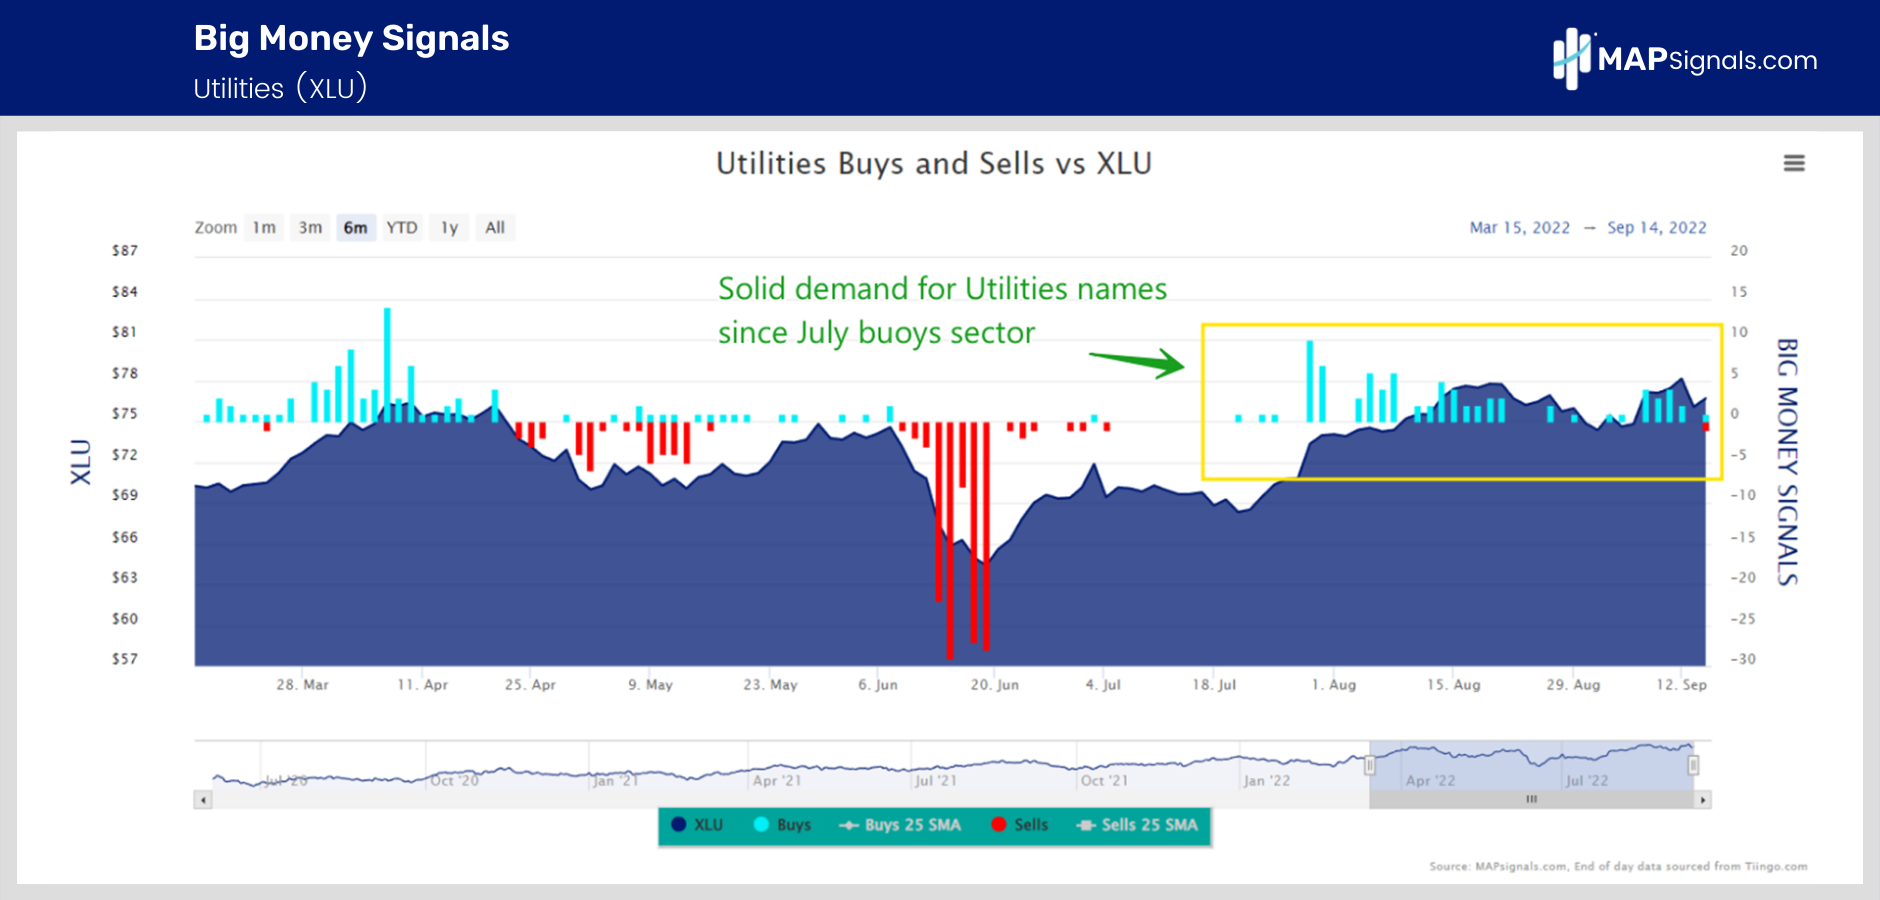 Solid demand for Utilities names since July buoys sector | Big Money Signals (XLU)